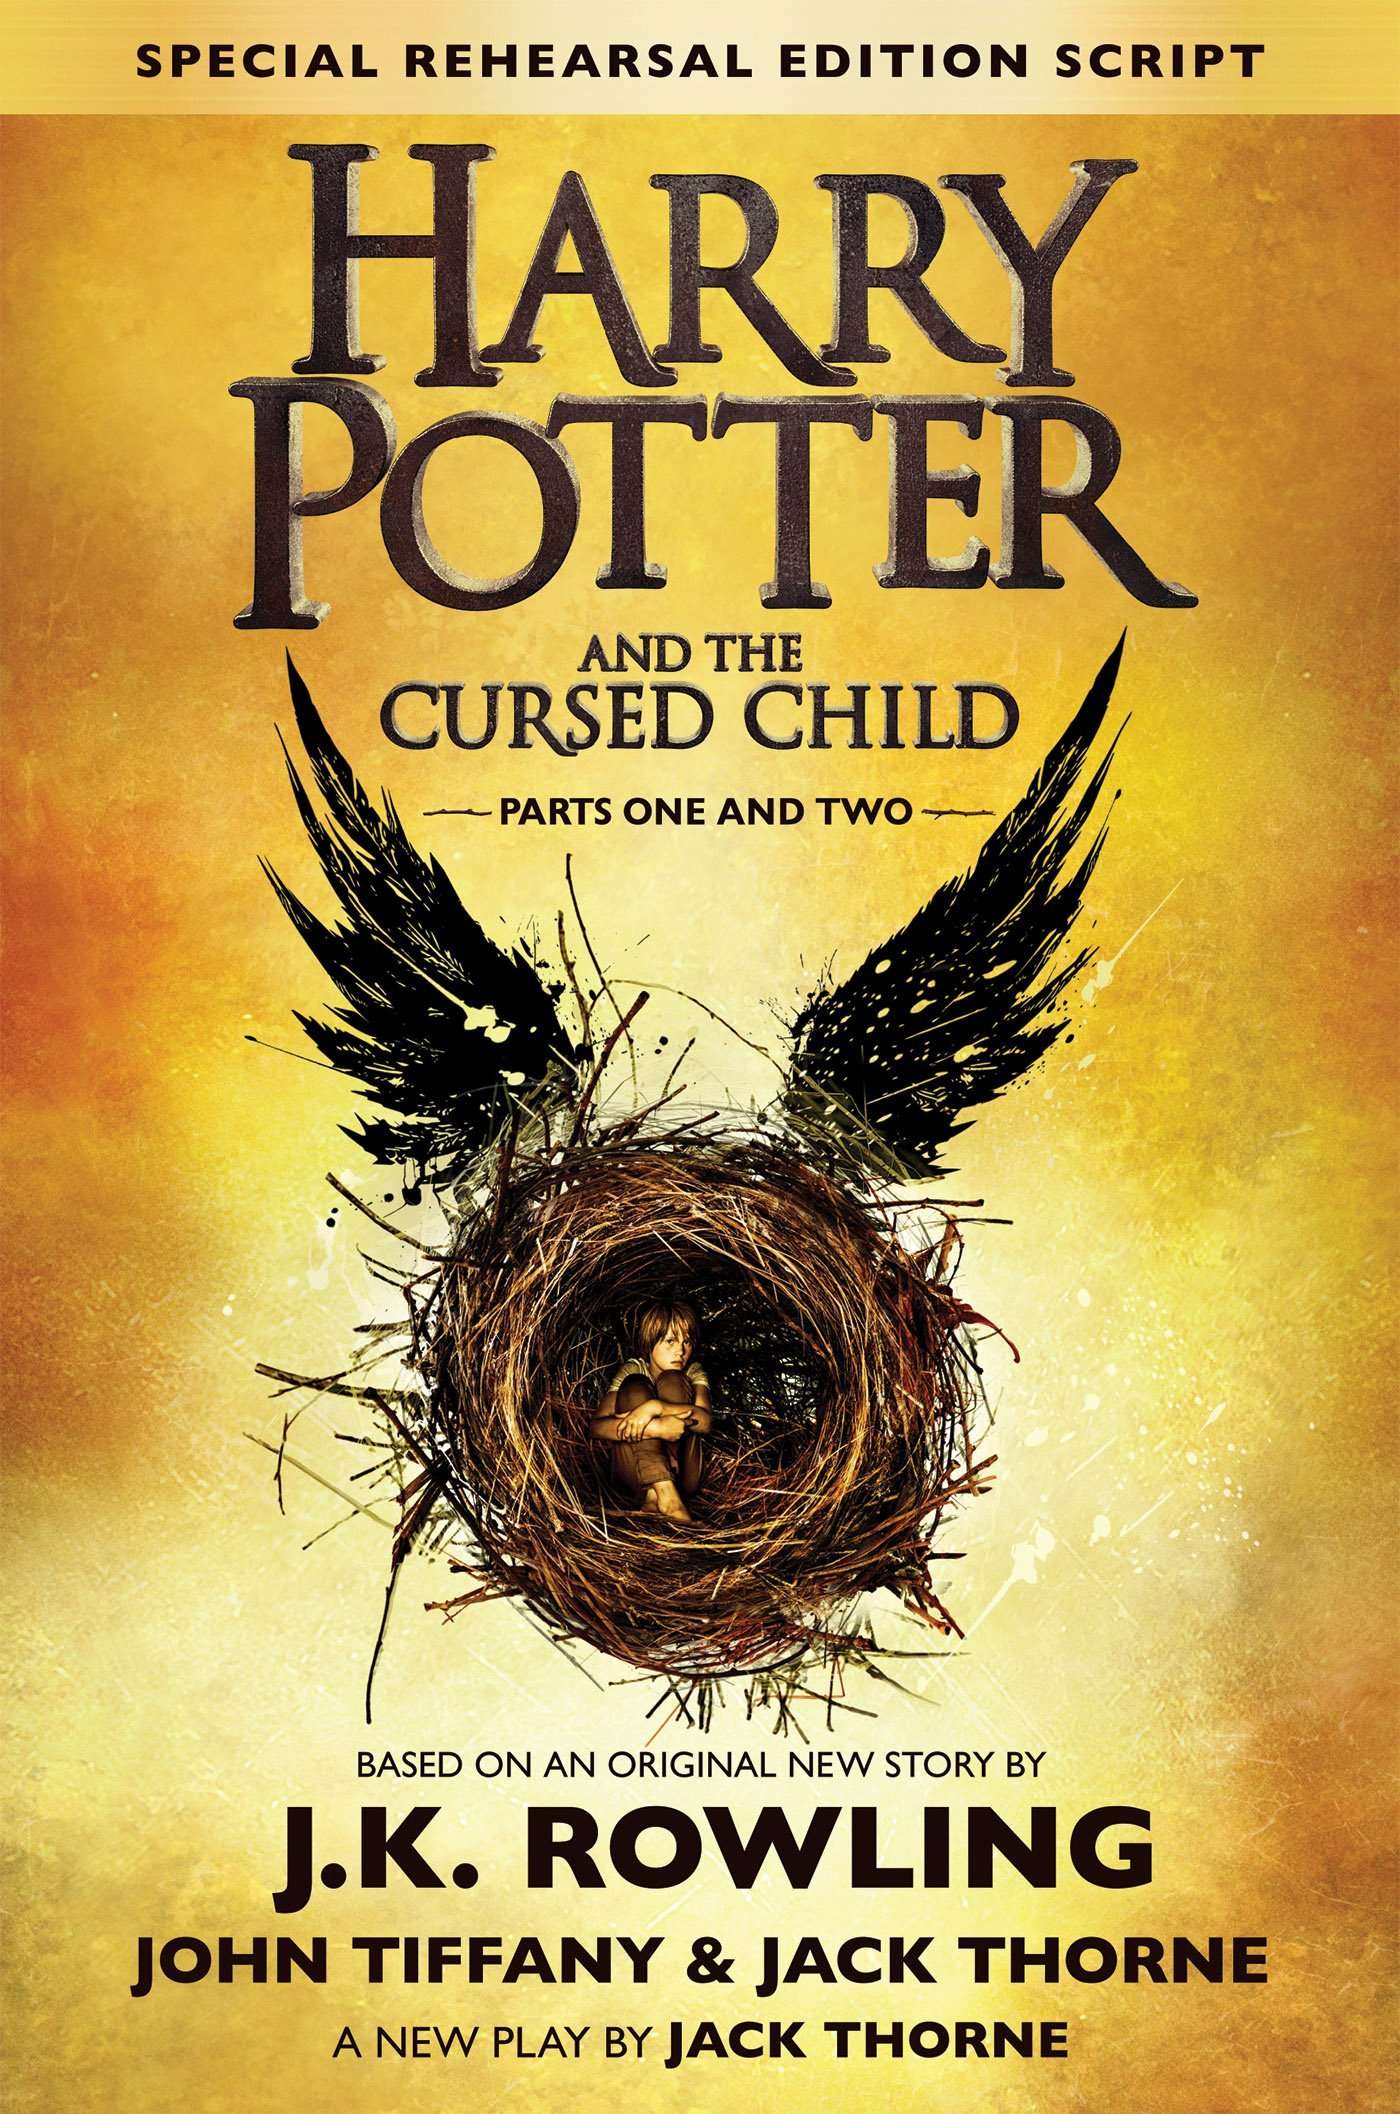 book review for harry potter and the cursed child